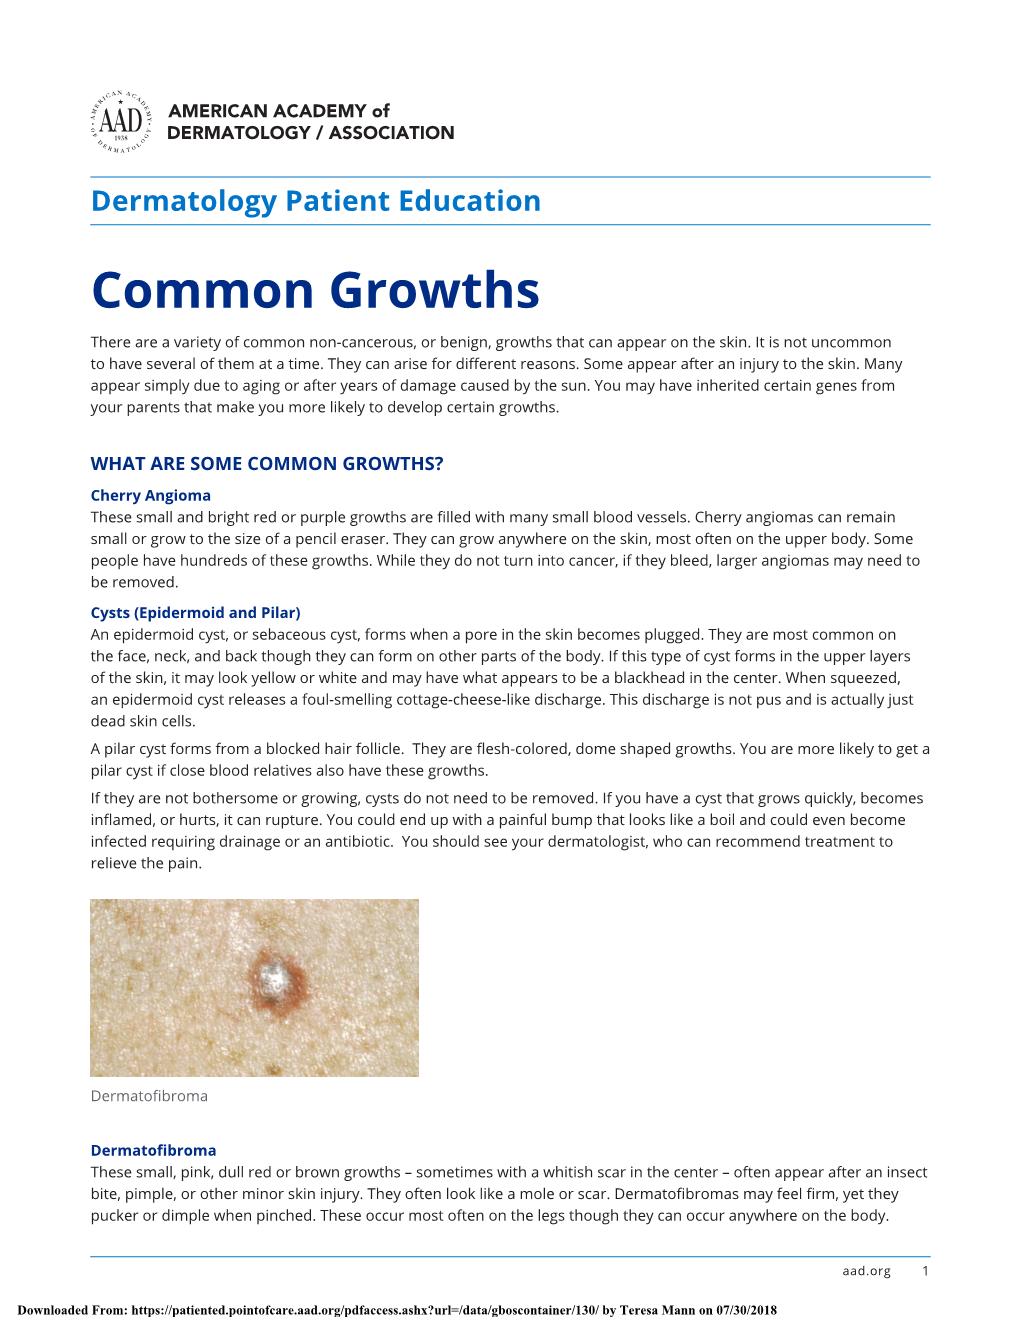 Common Growths There Are a Variety of Common Non-Cancerous, Or Benign, Growths That Can Appear on the Skin